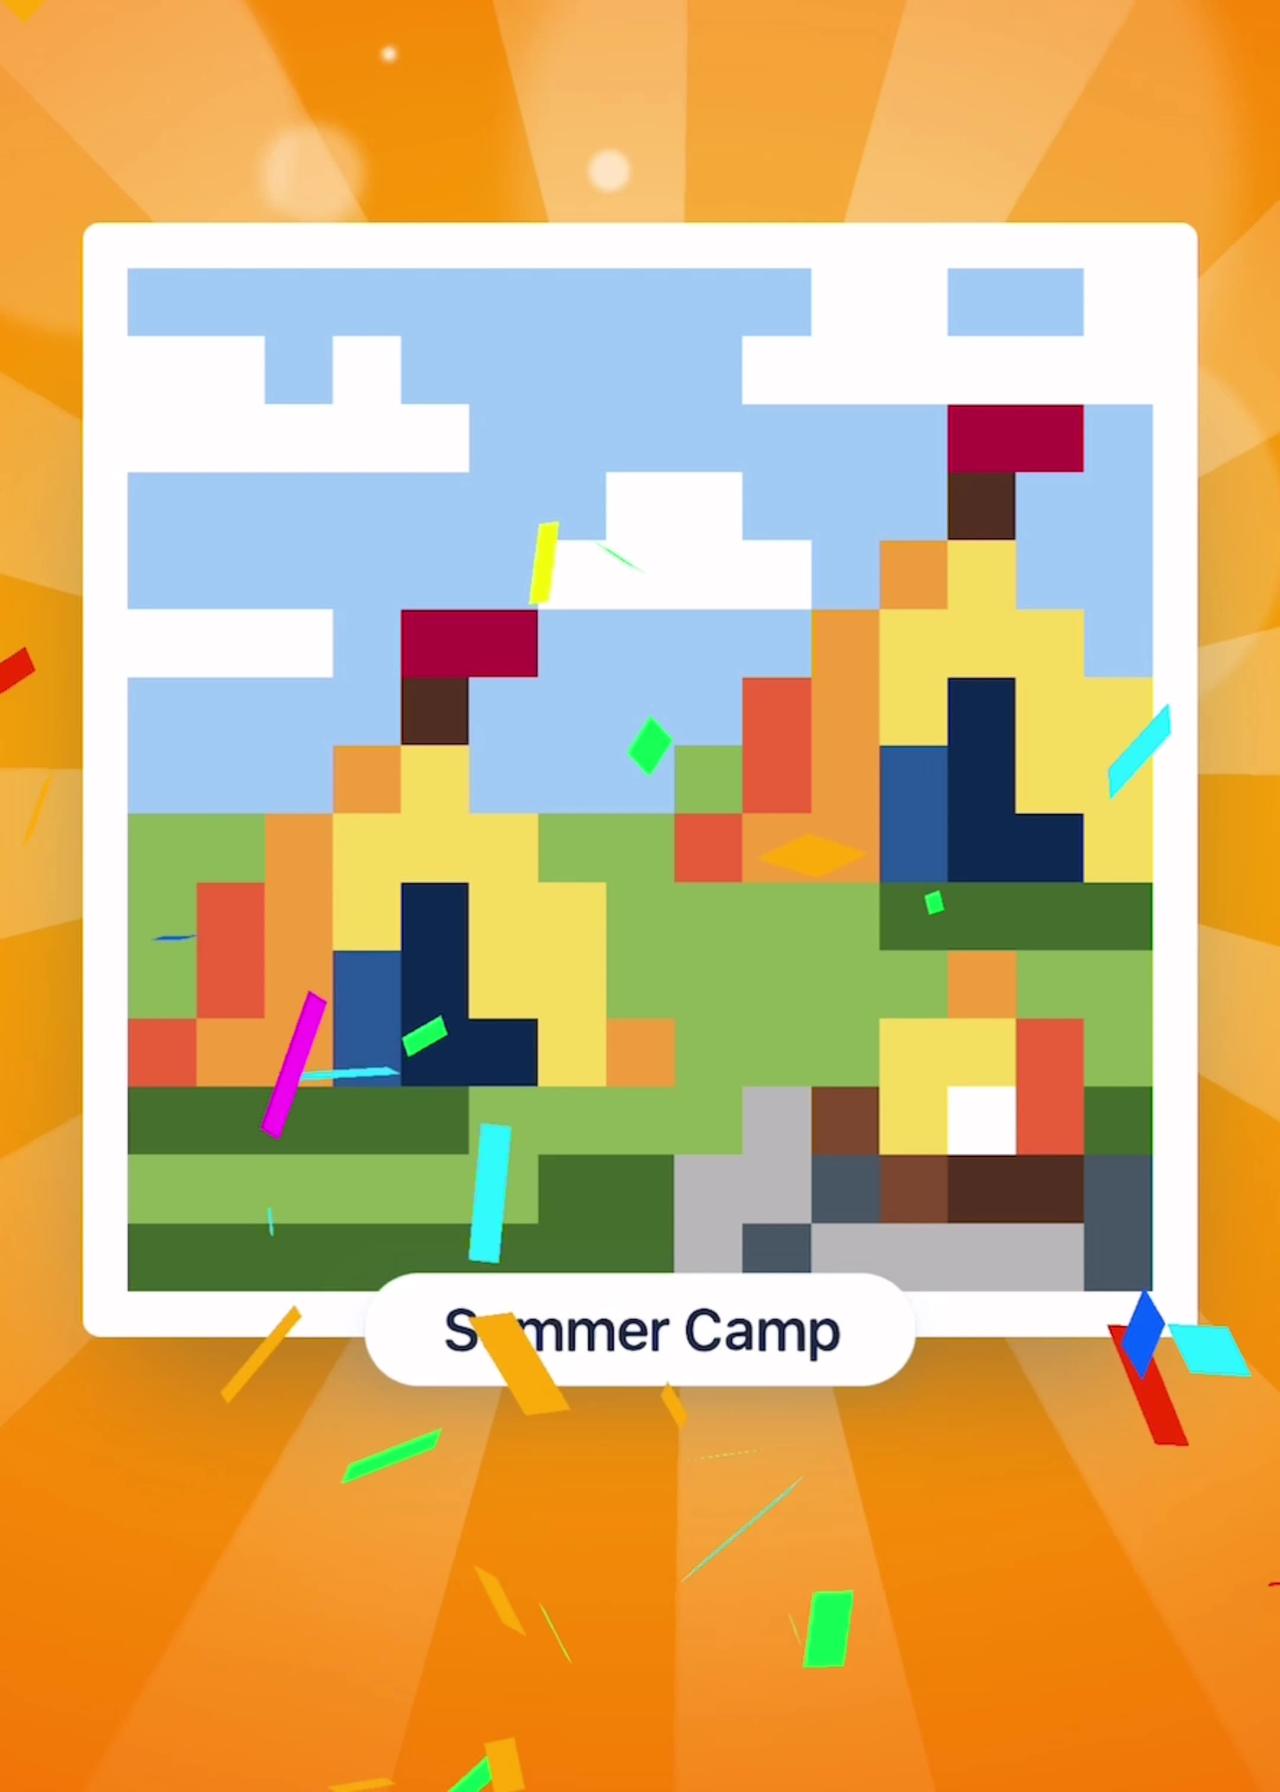 #005 Summer Camp 🏕️ [15x15] - #Nonograms solver with music